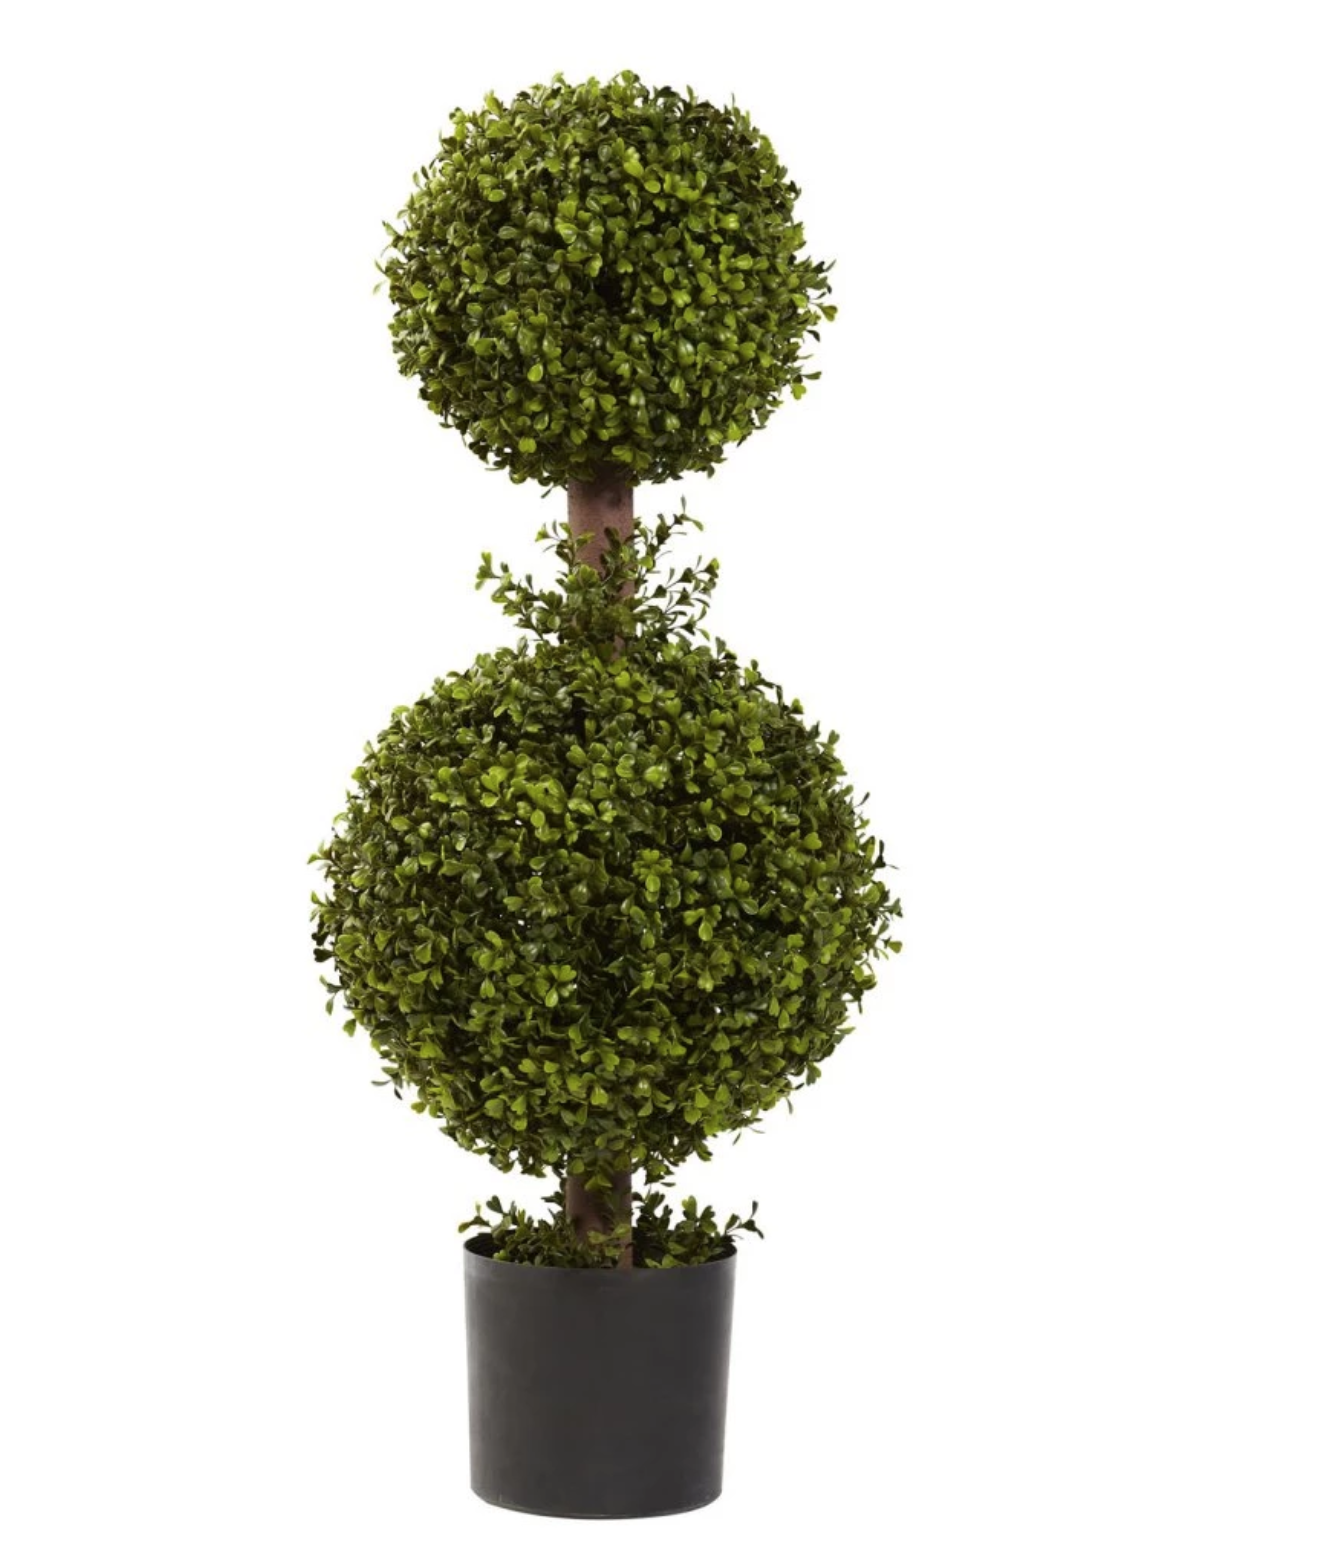 A tree with two balls of leaves is in a grey pot.